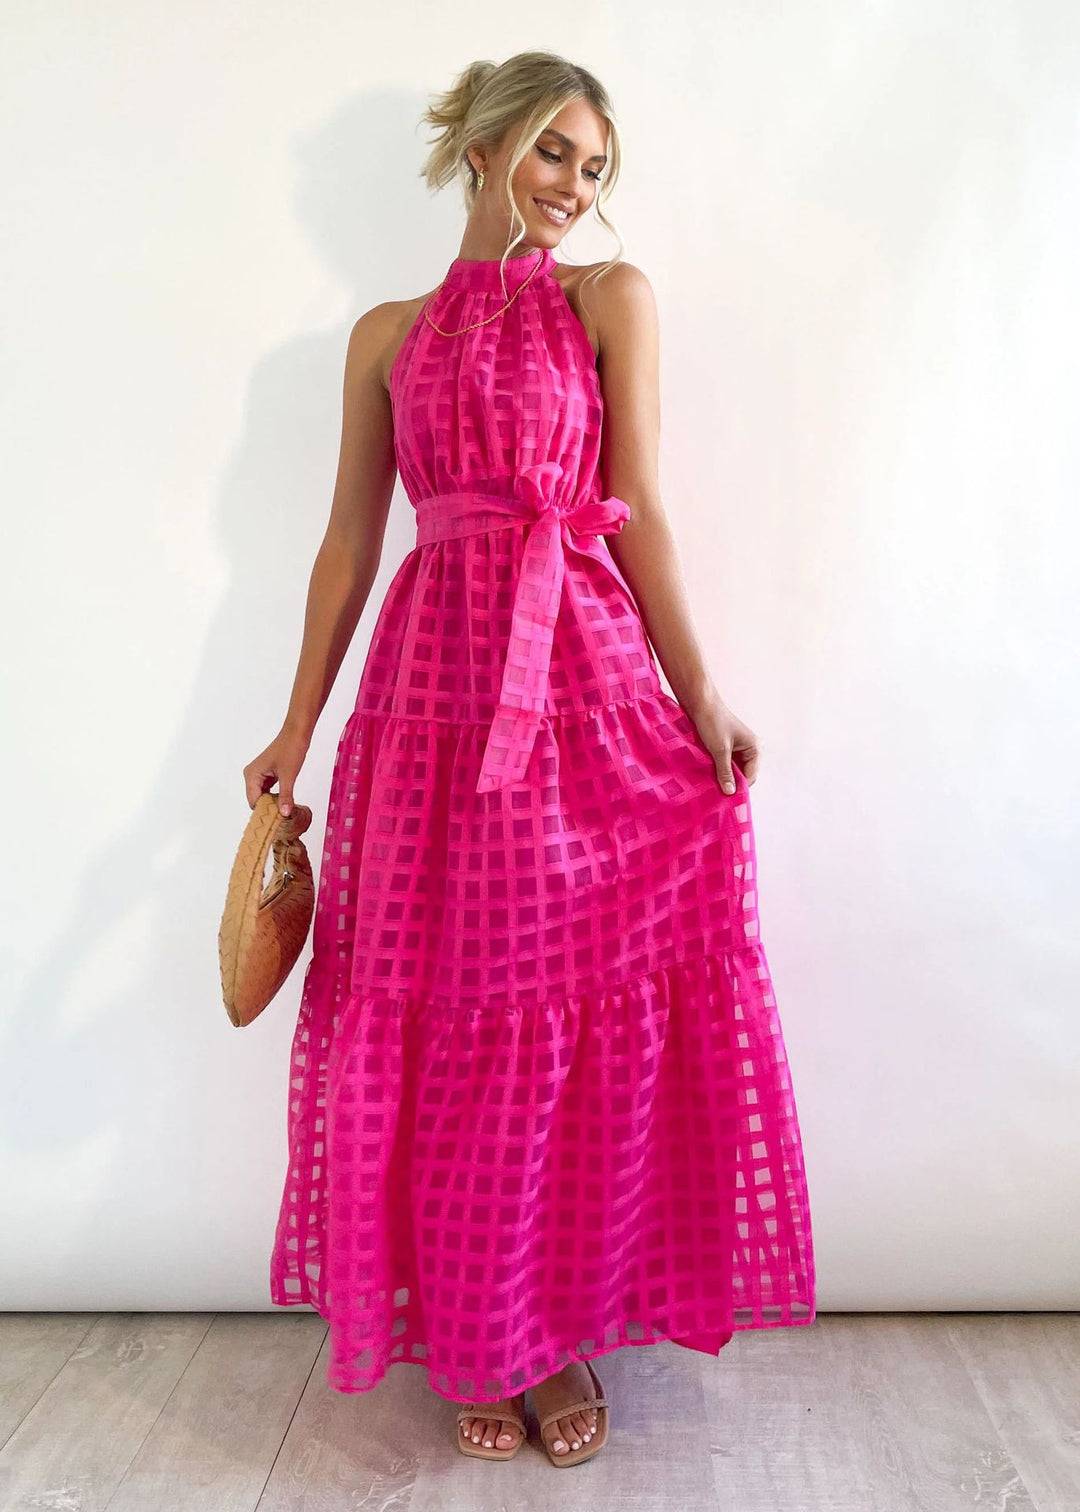 Spring Summer Stand Collar Solid Color Plaid Retro Maxi Dress Casual Dress for Women